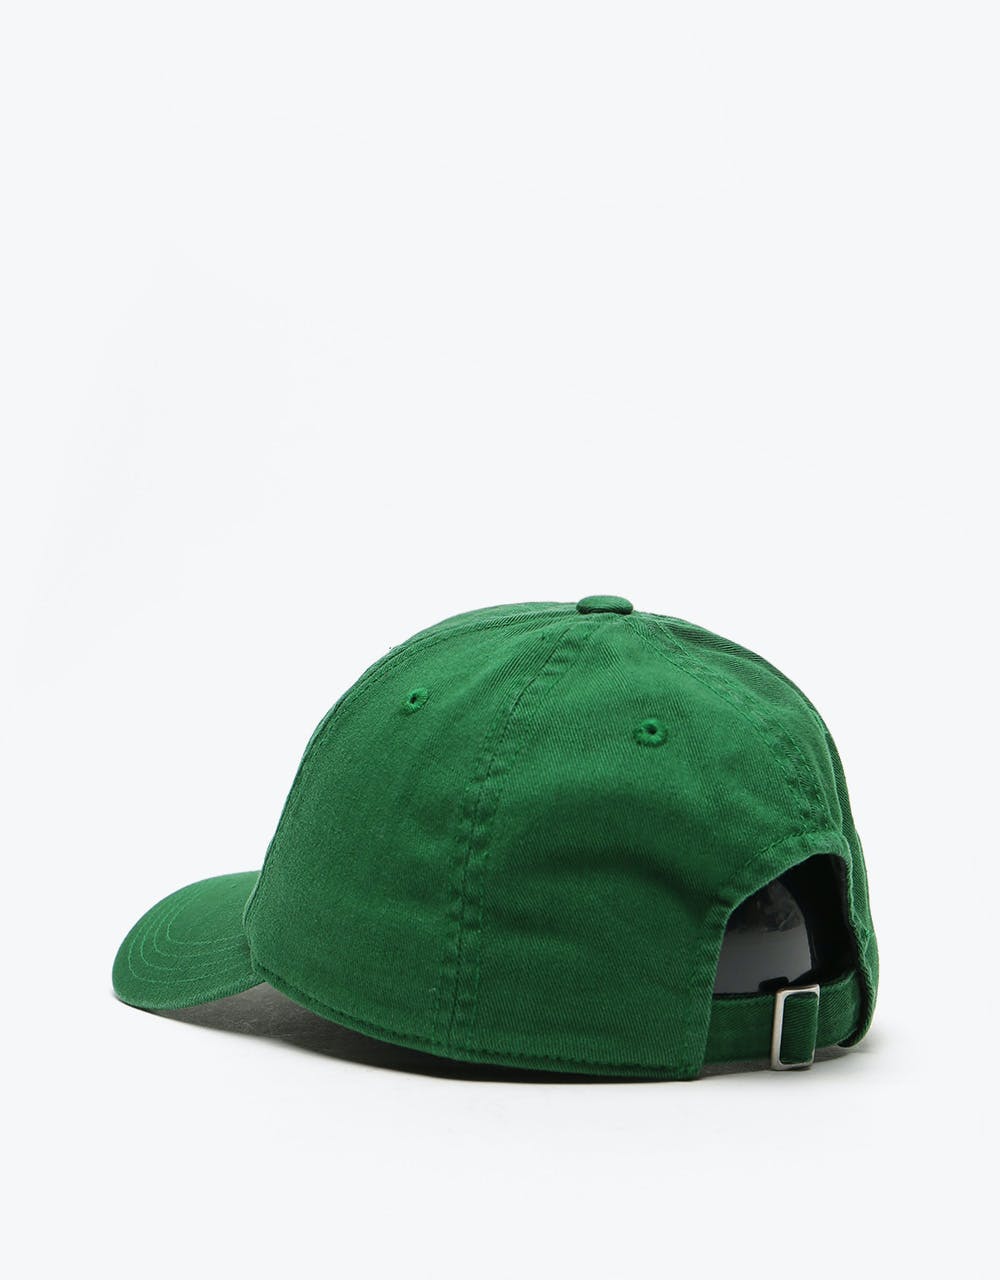 Route One Burnout Cap - Forest Geen